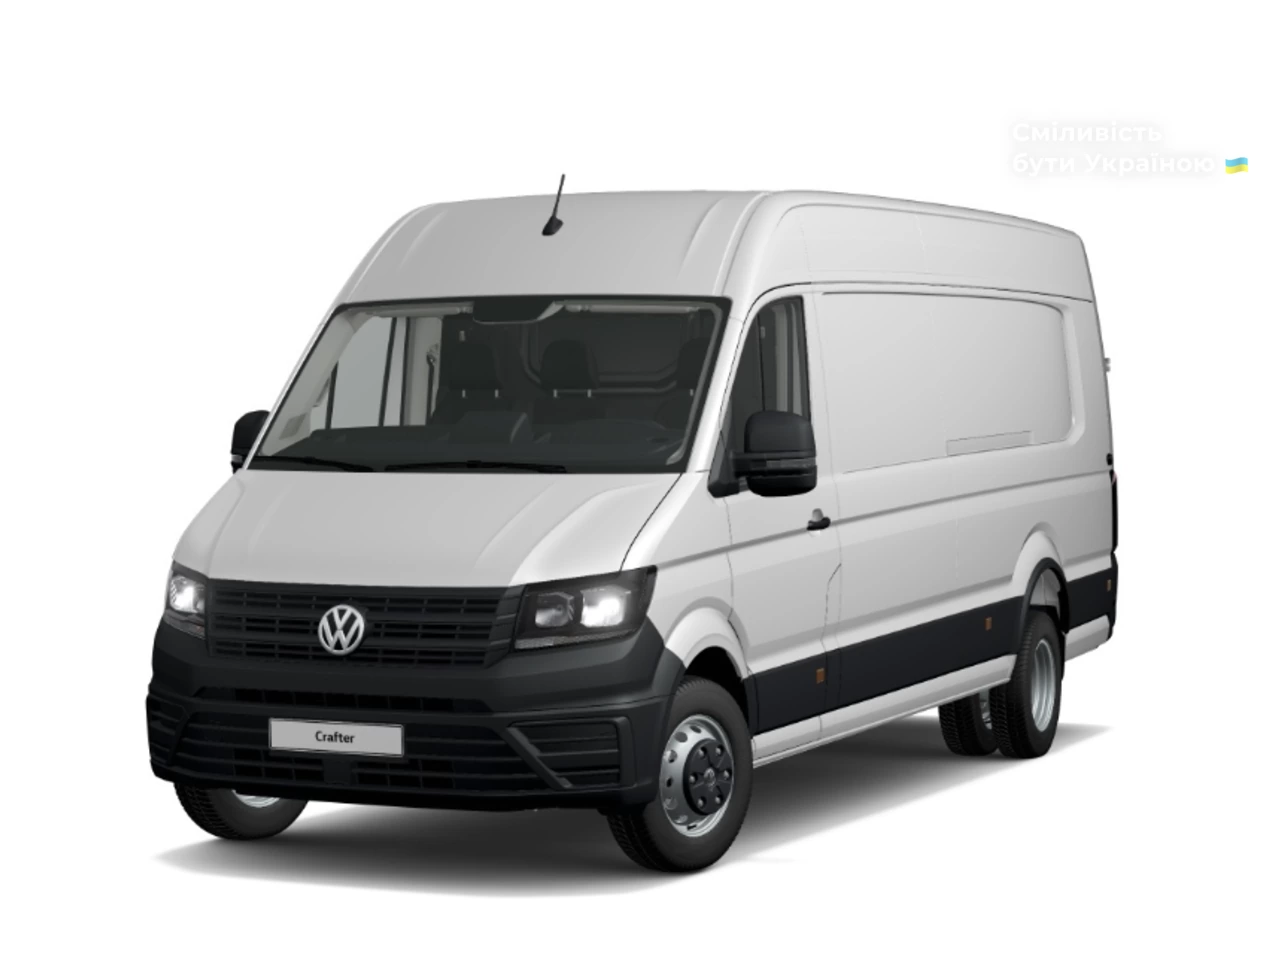 Volkswagen Crafter вантаж HD UH Express